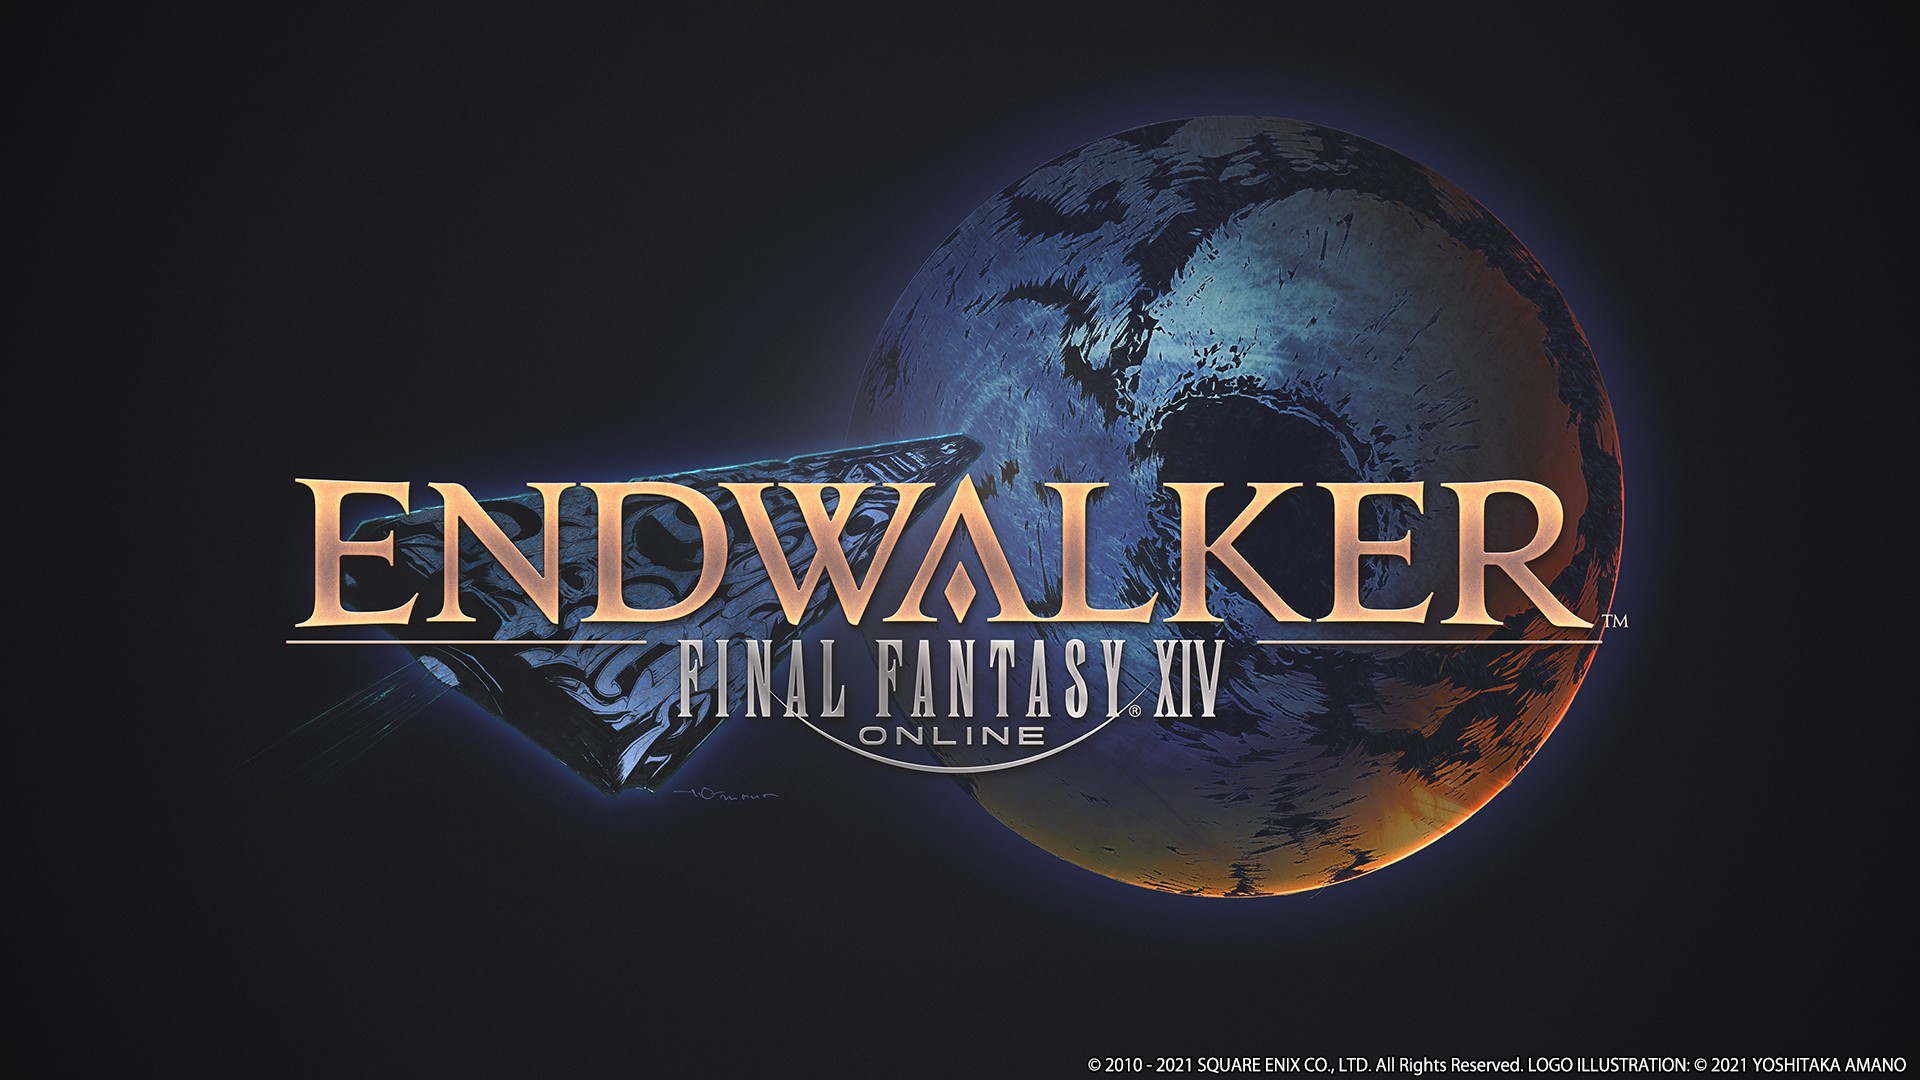 ff14 free trial to full game steam